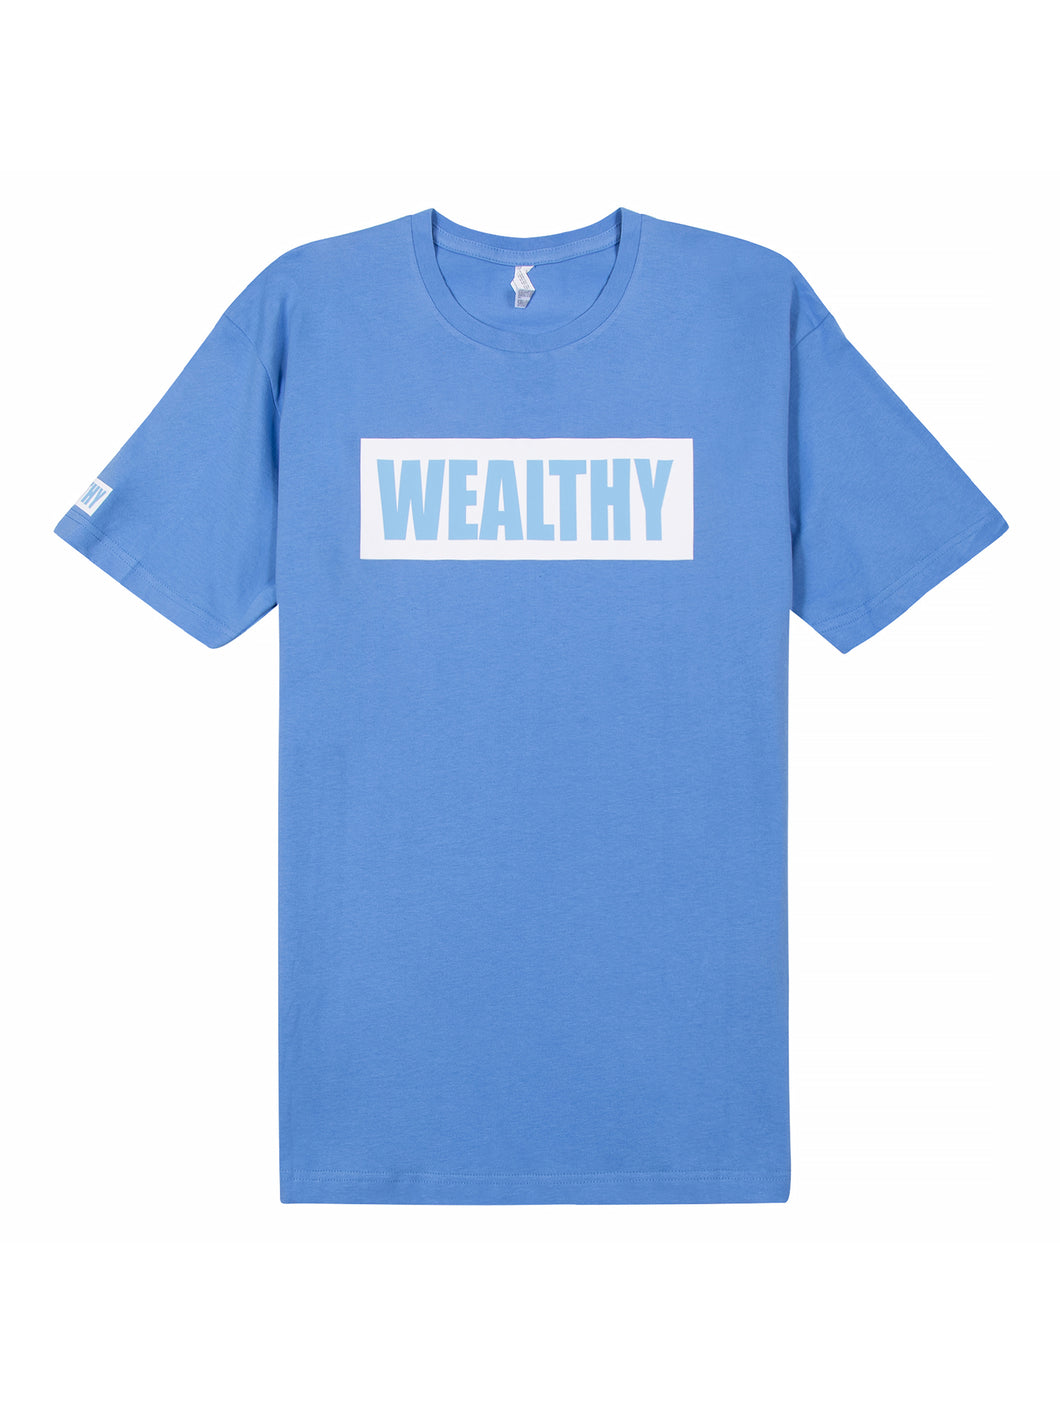 Wealthy Tee (Baby Blue/White)